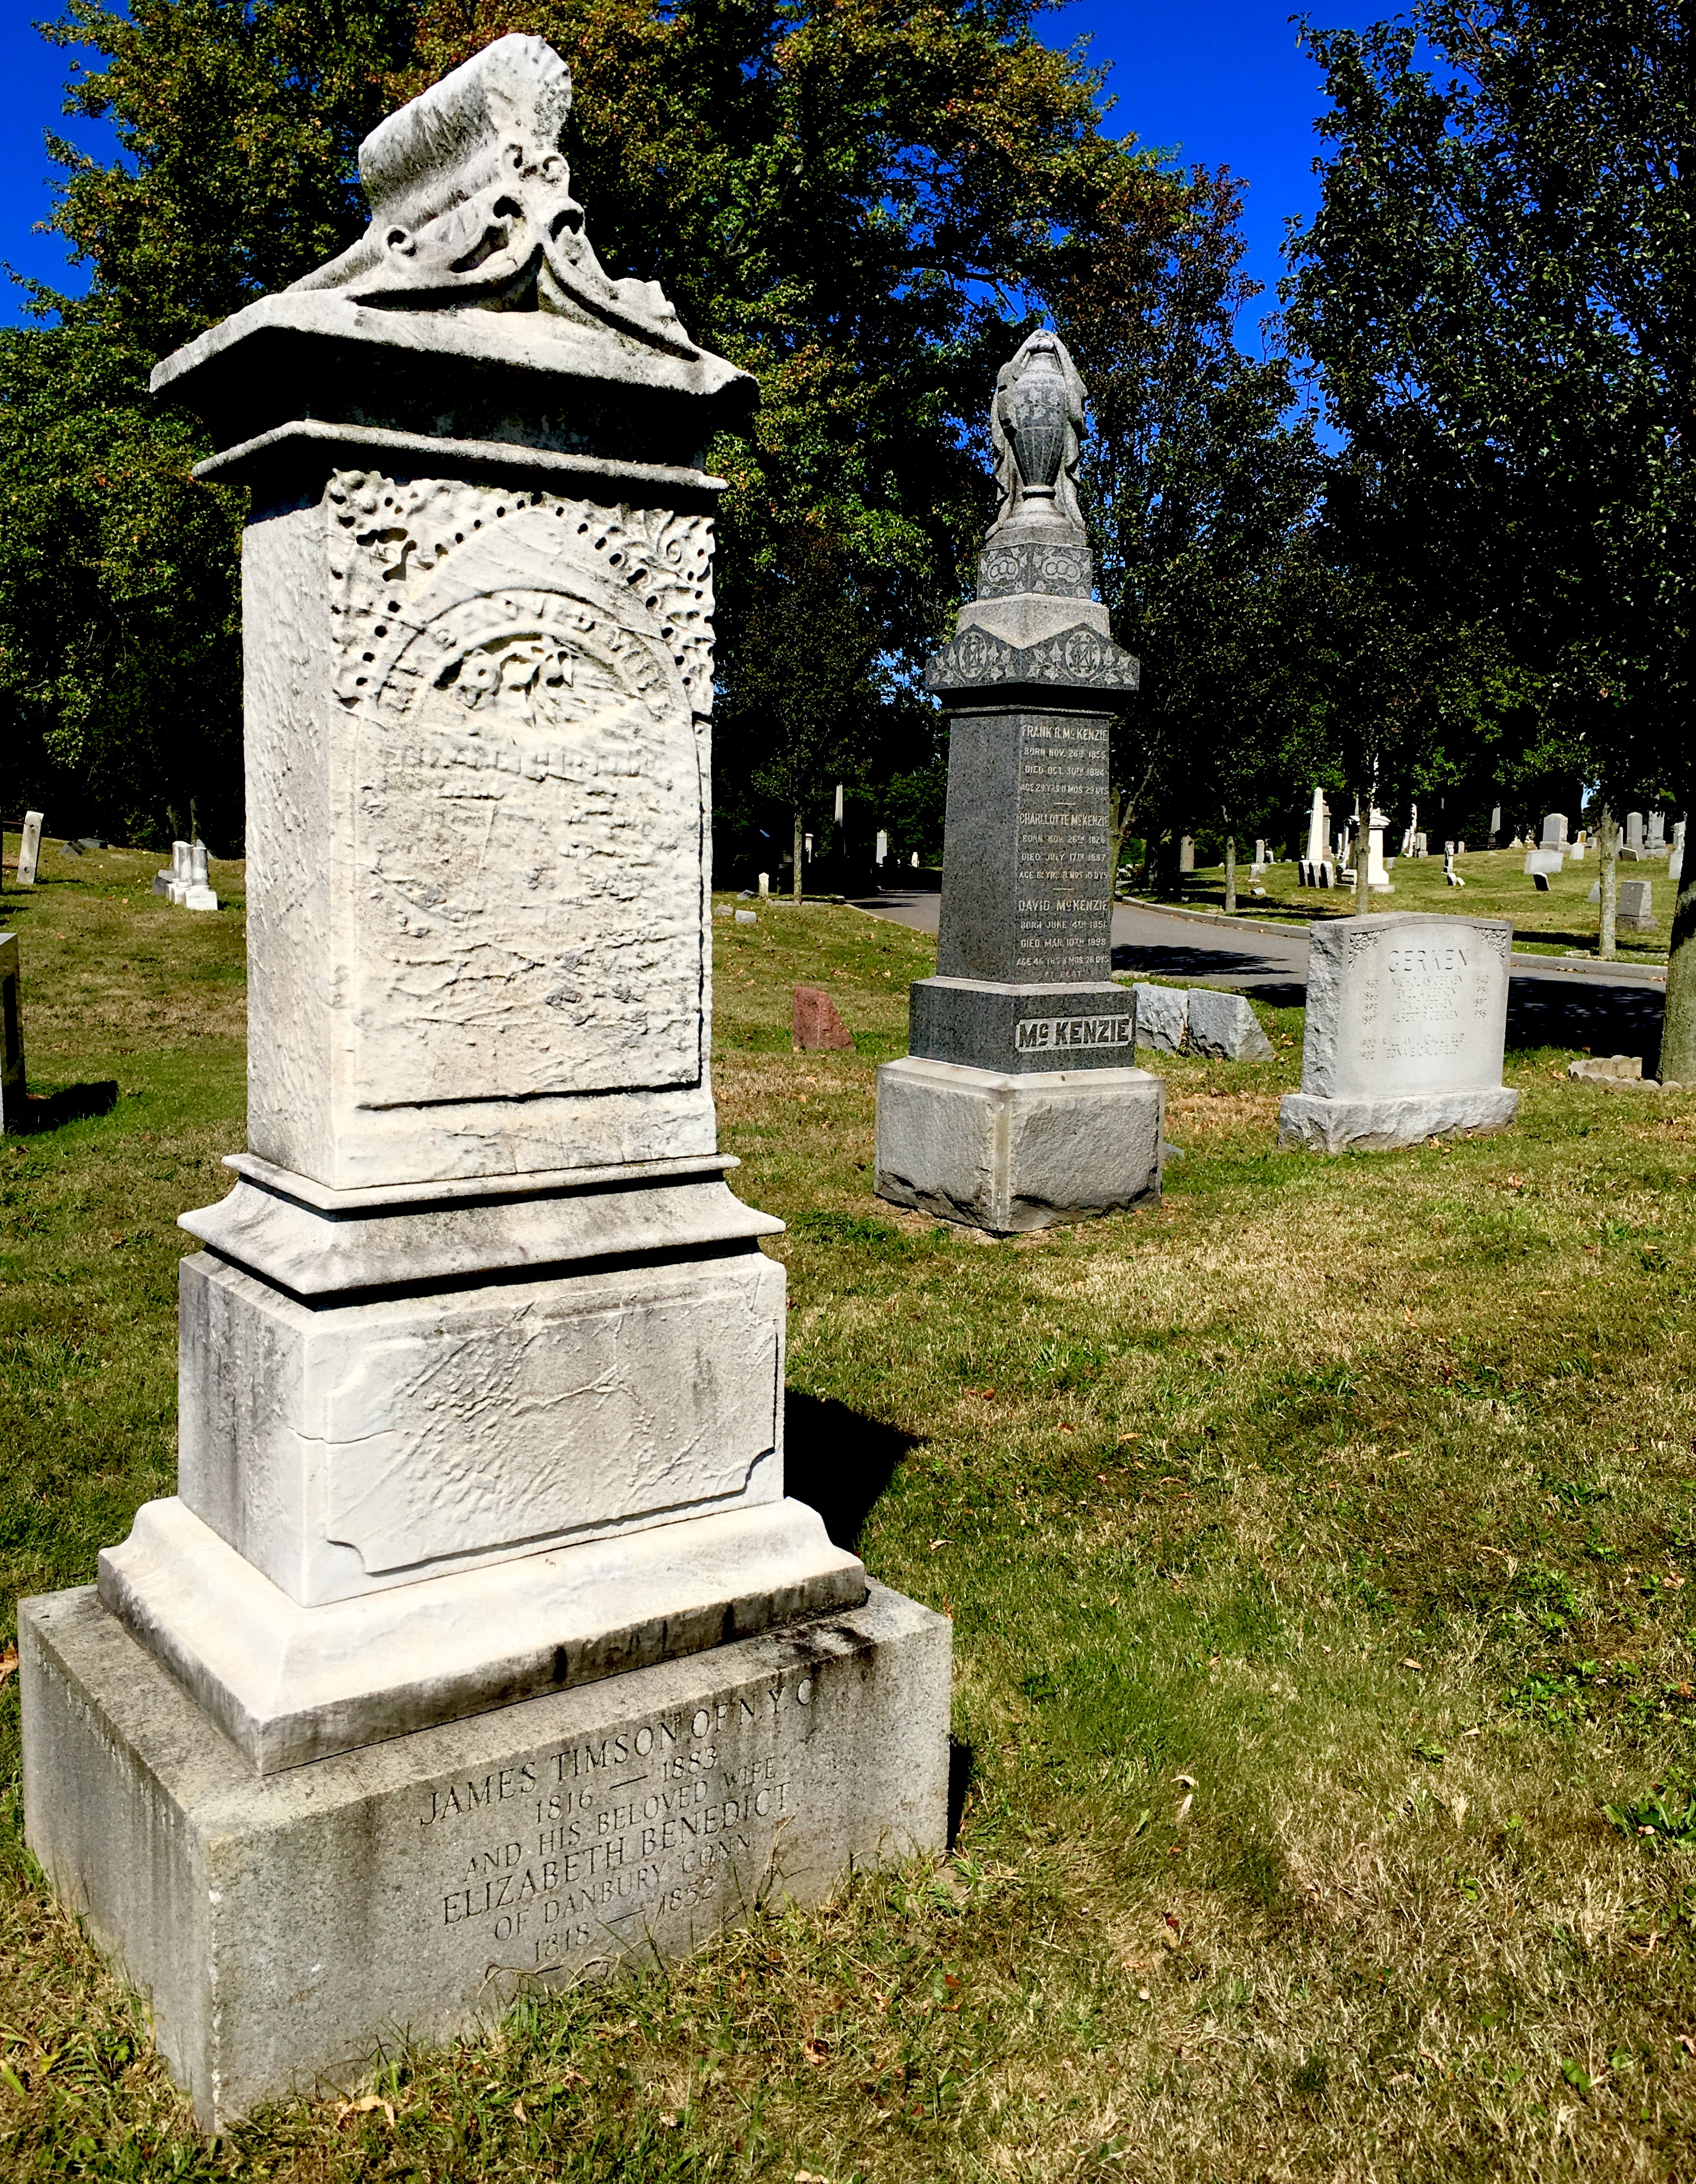 The beautiful monument at left marks the grave of spouses James Timson and Elizabeth Benedict. Eagle photo by Lore Croghan